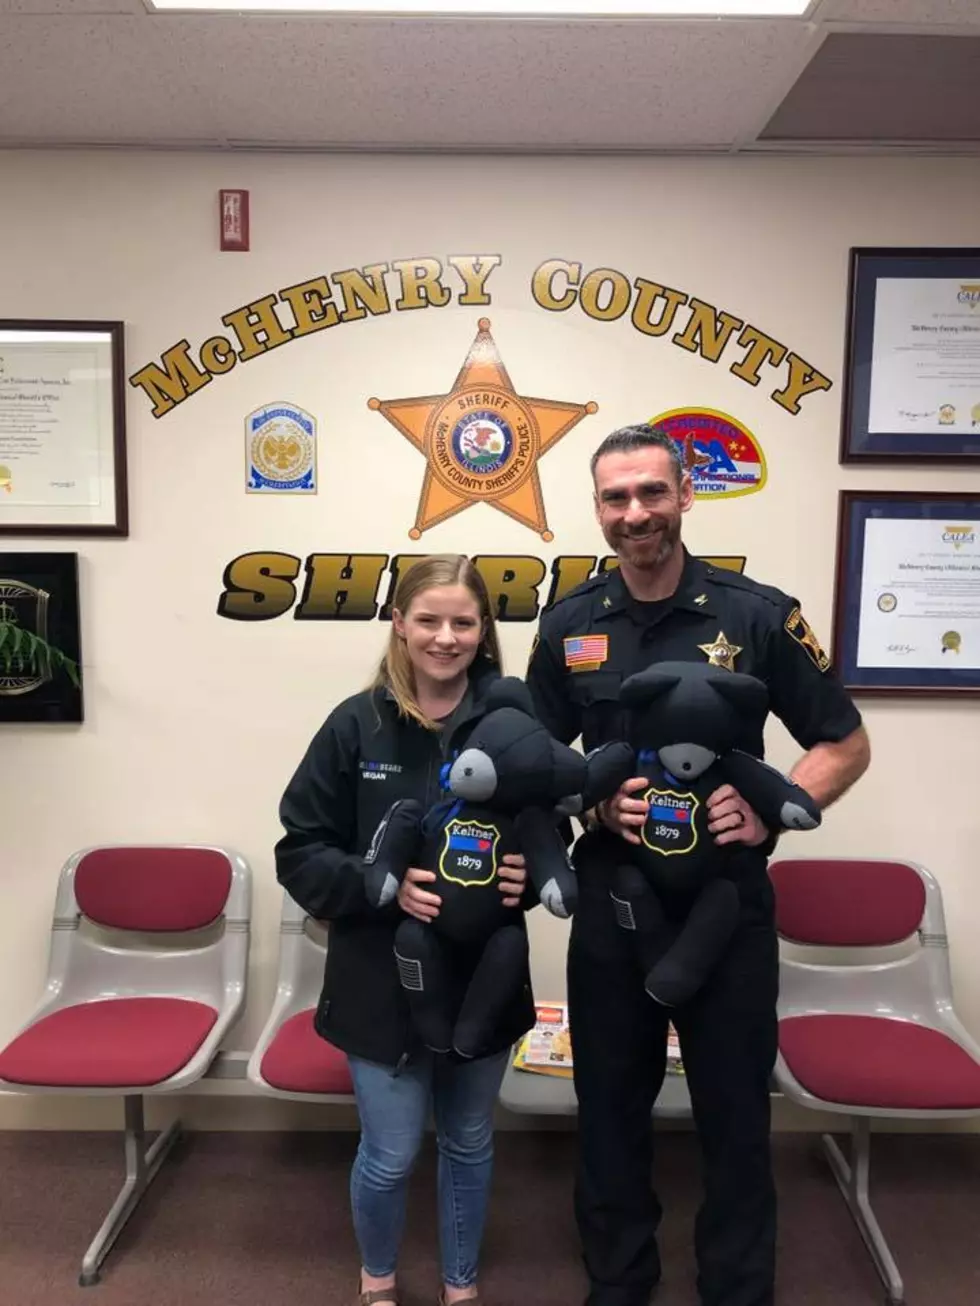 Deputy Keltner’s Sons Receive Bears Made From Their Dad’s Uniform